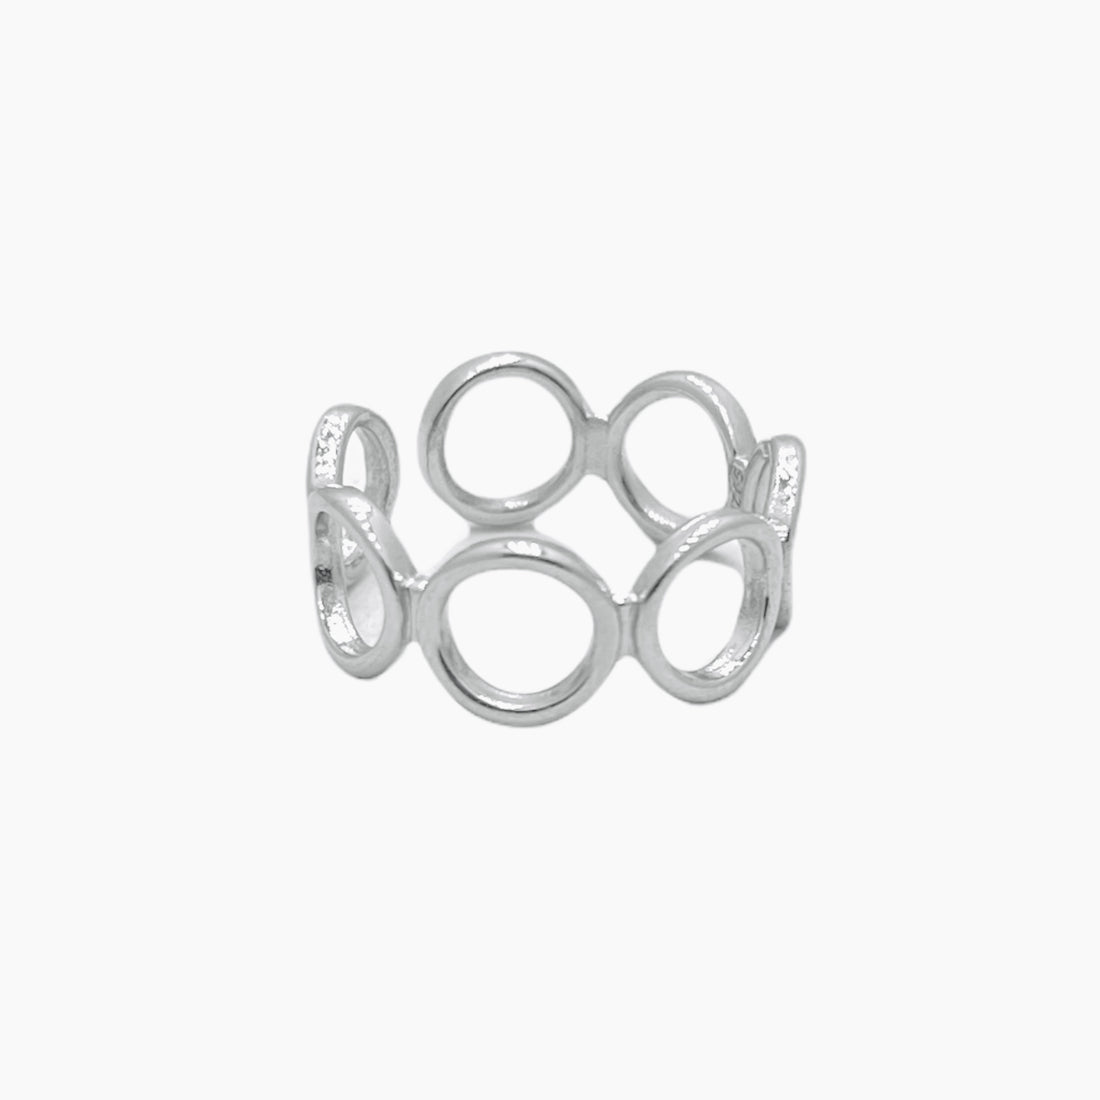 S925 sterling silver ring with circular relief